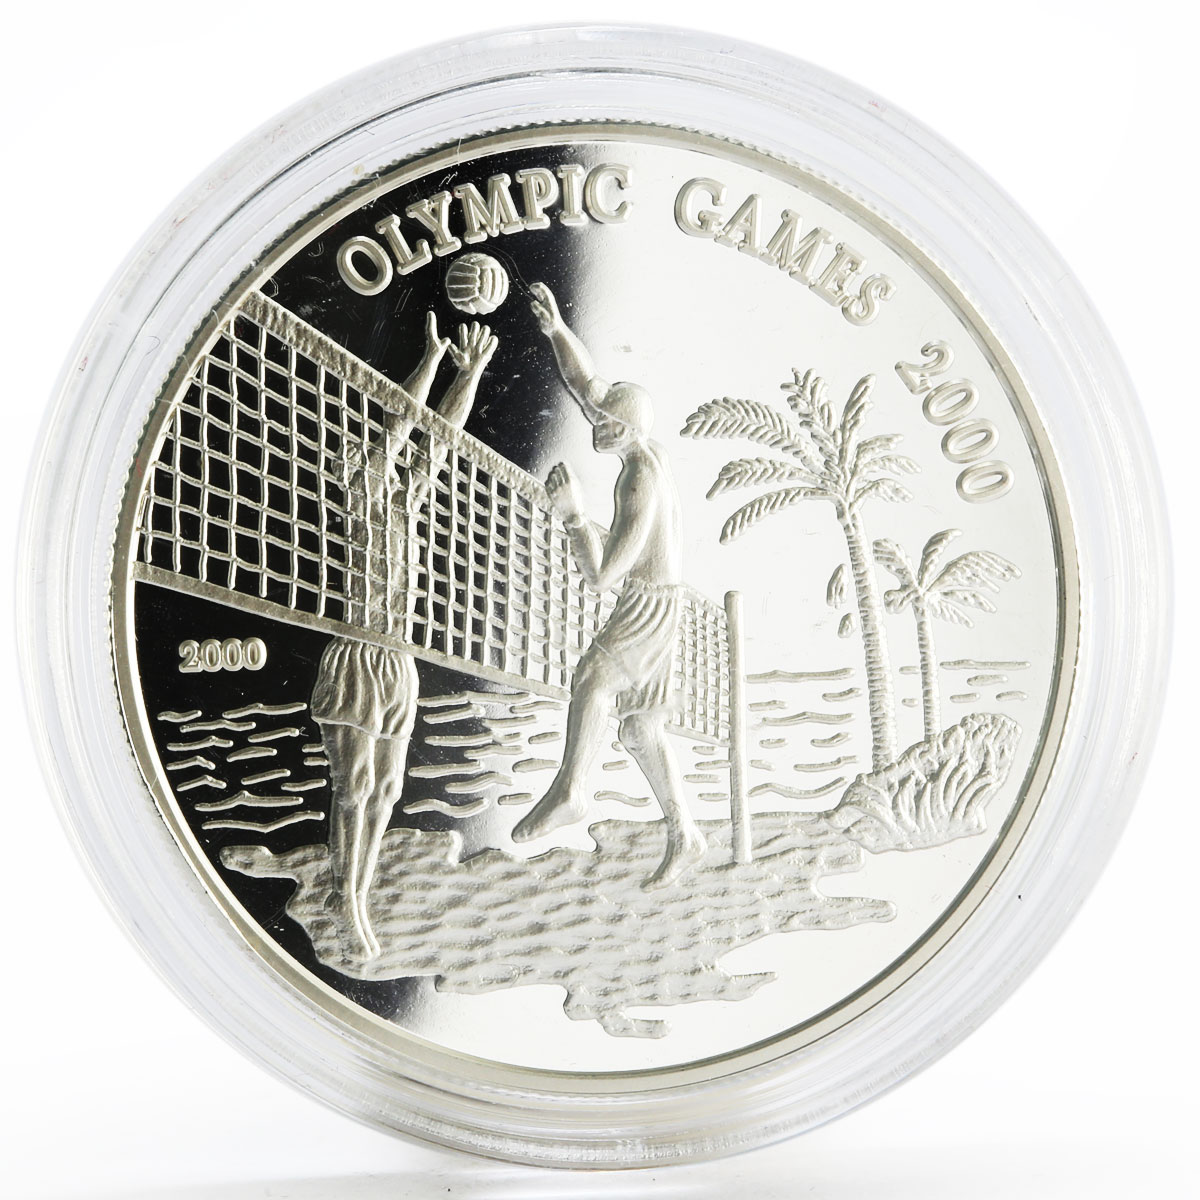 Samoa 10 dollars Sydney Olympic Games series Volleyball proof silver coin 2000